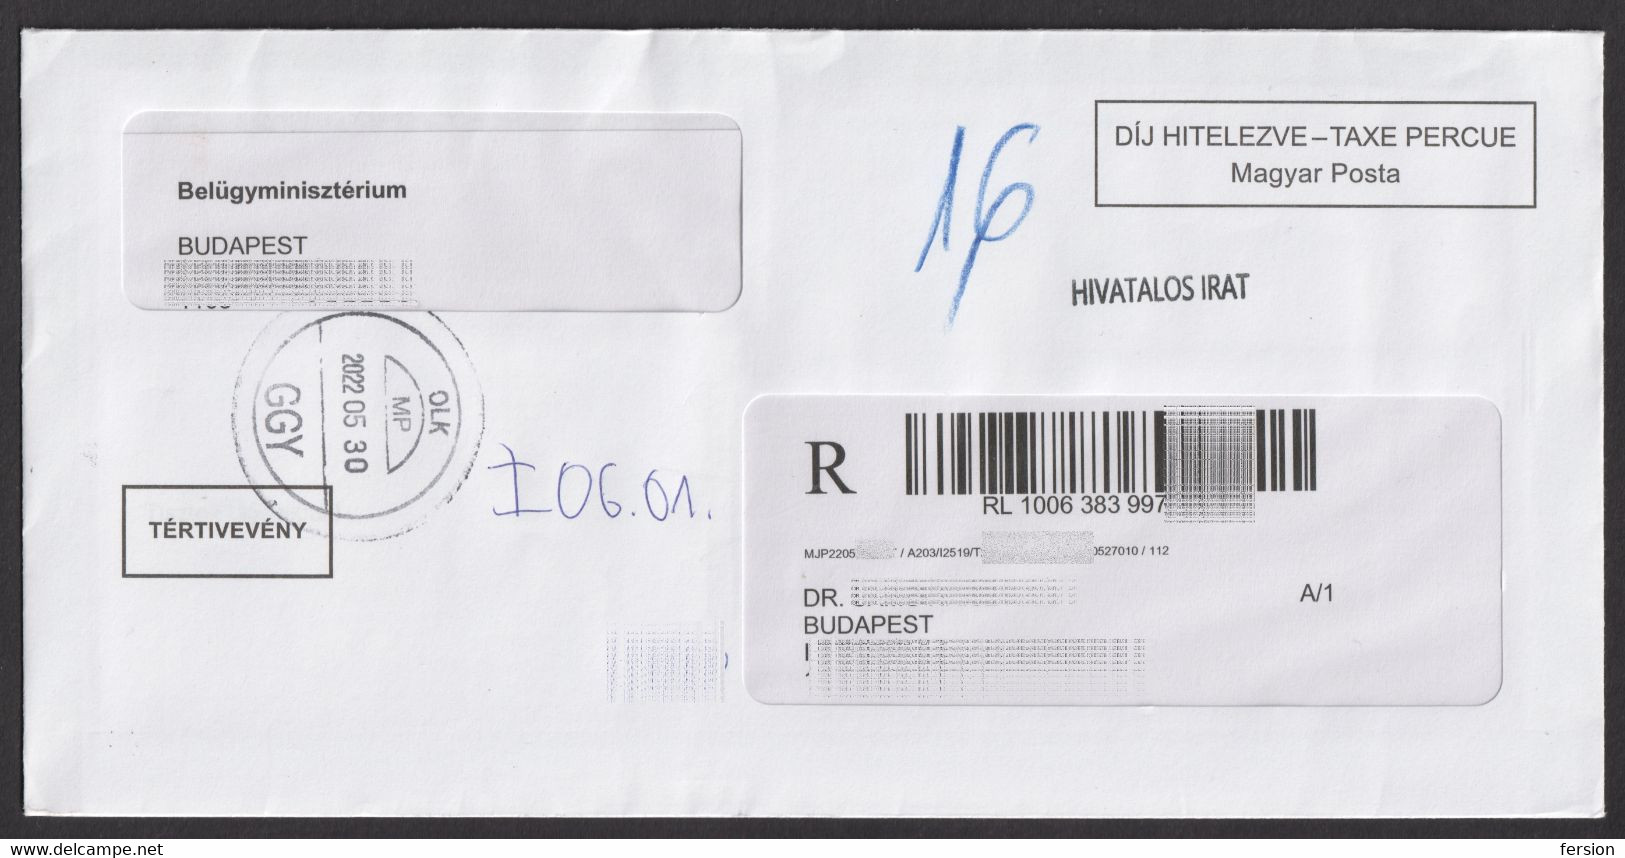 Ministry Of The Interior - 2022 Hungary - WINDOW Envelope Letter AR Avis De Reception Registered  TAXE PERCUE - Covers & Documents